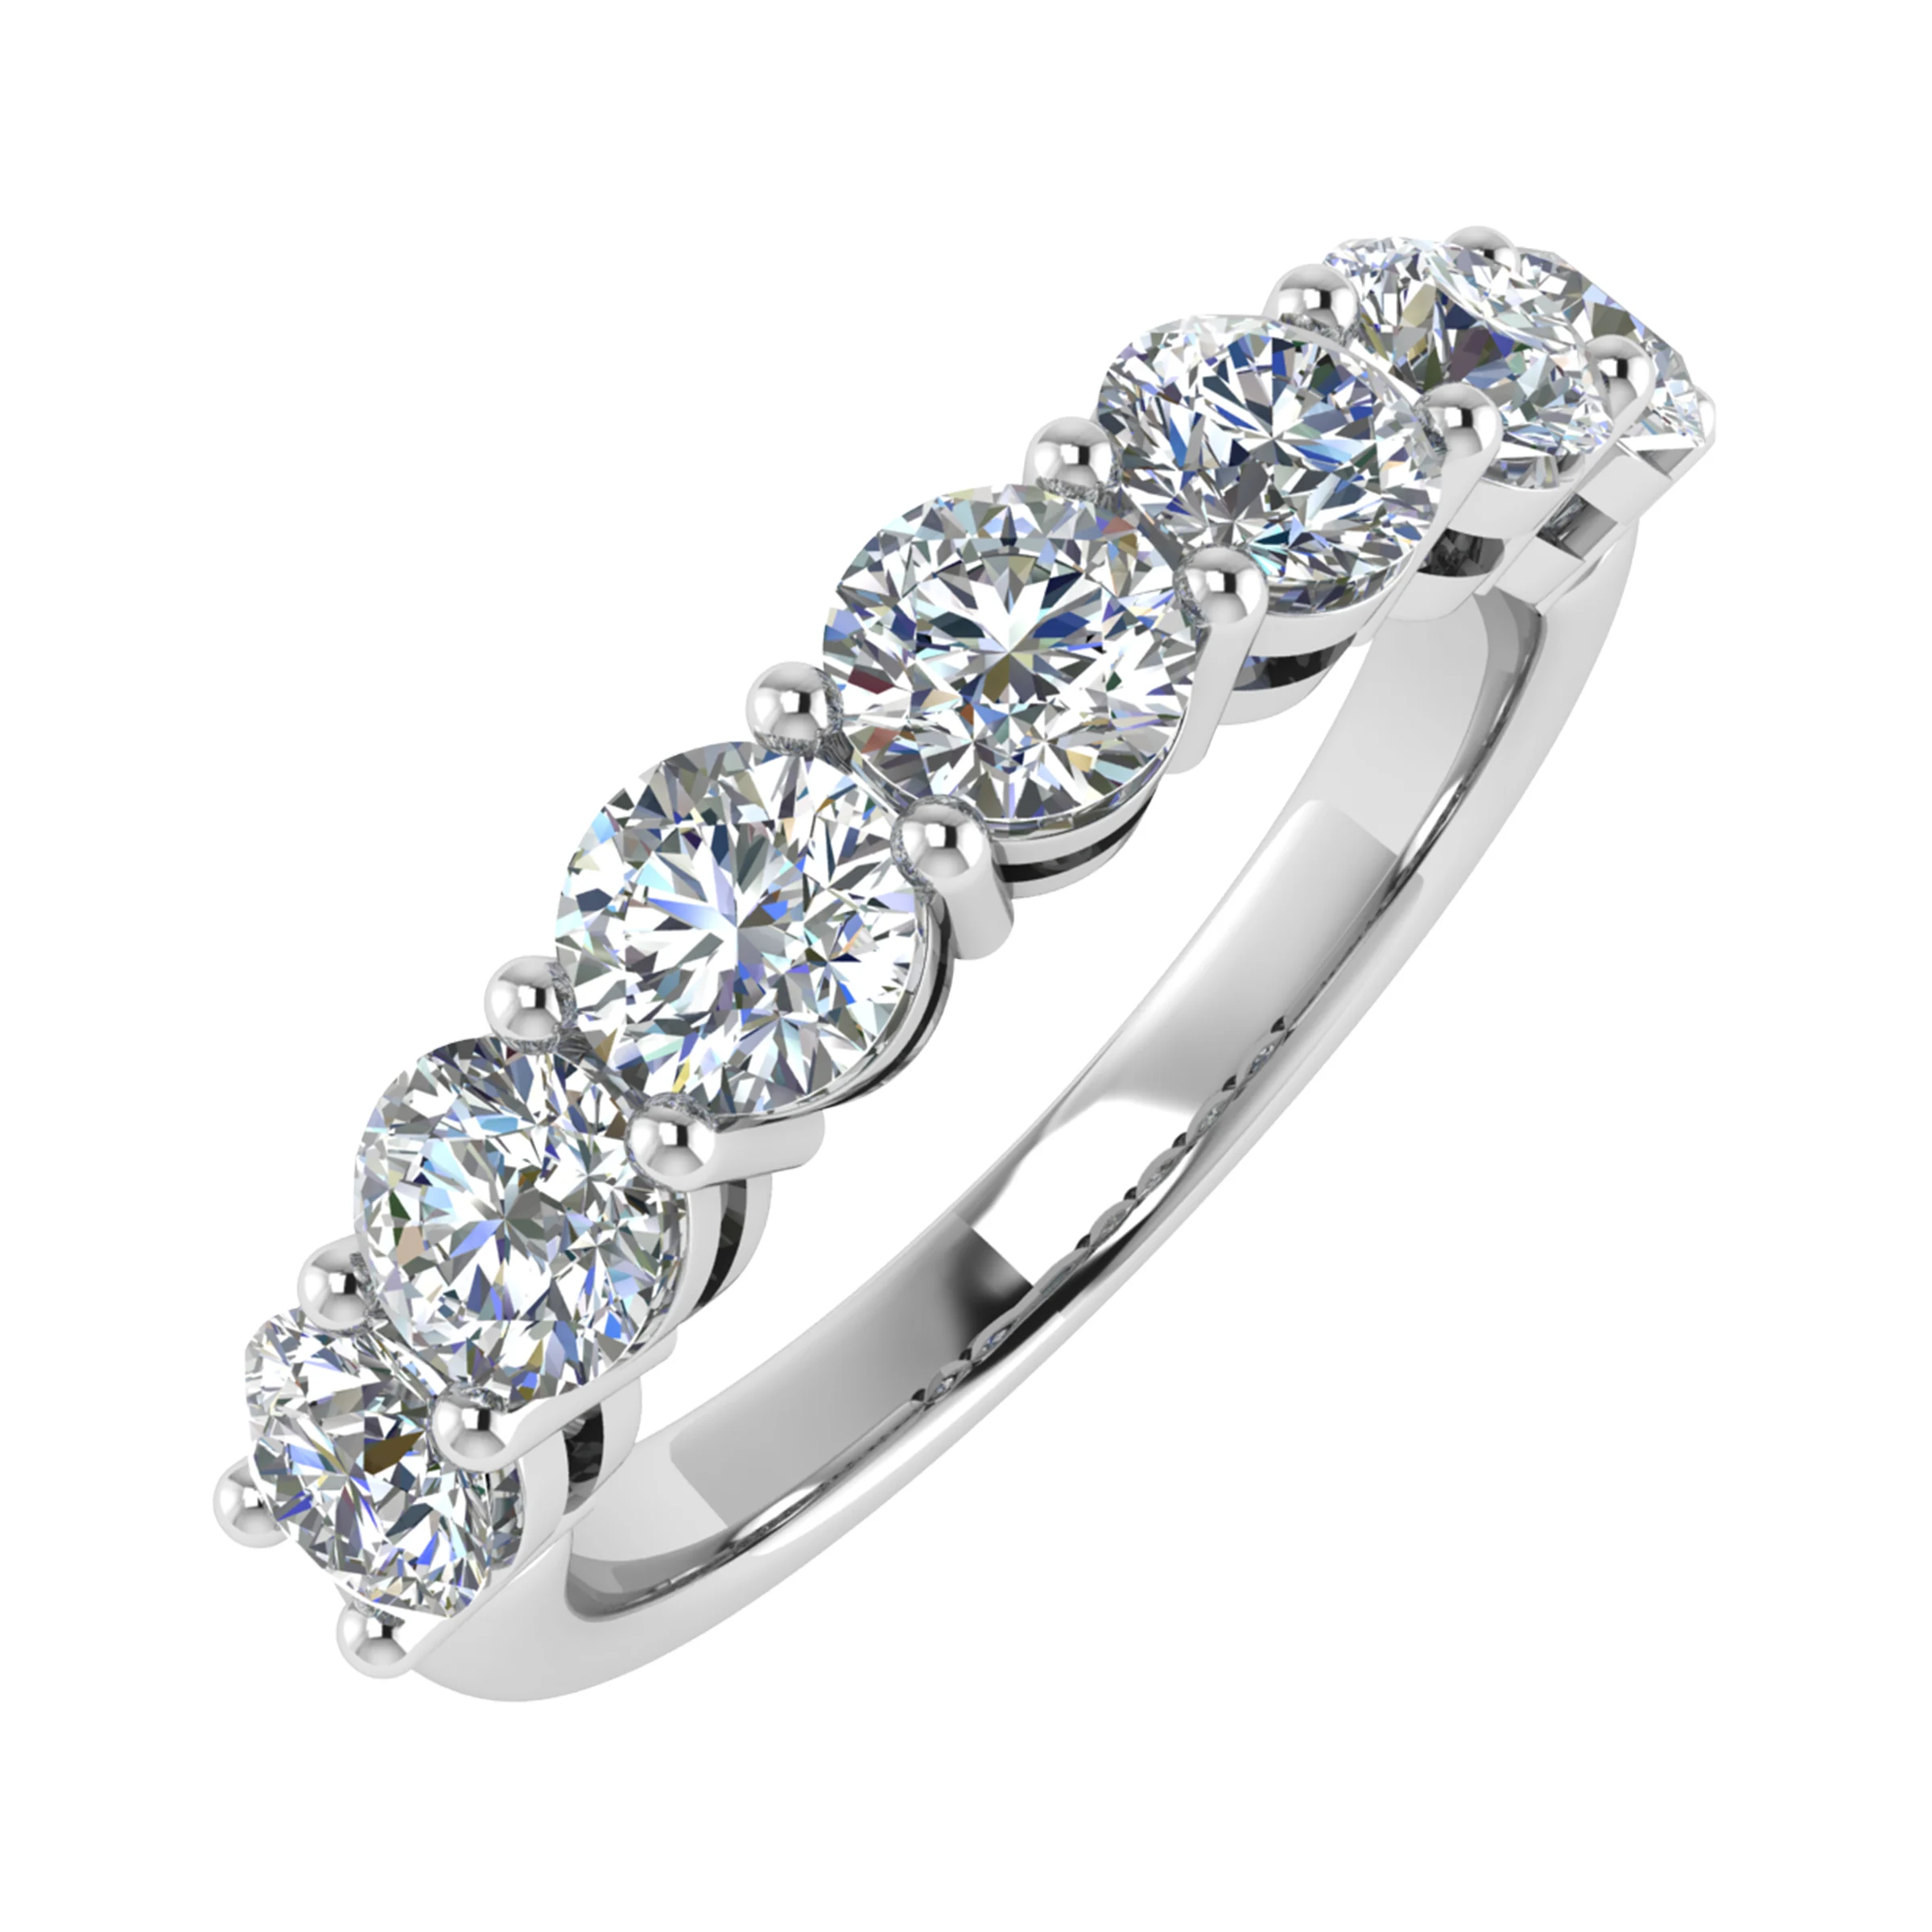 0.25 - 1.75 Carat Round Diamond Seven Stone Anniversary Ring with Shared Claw Set